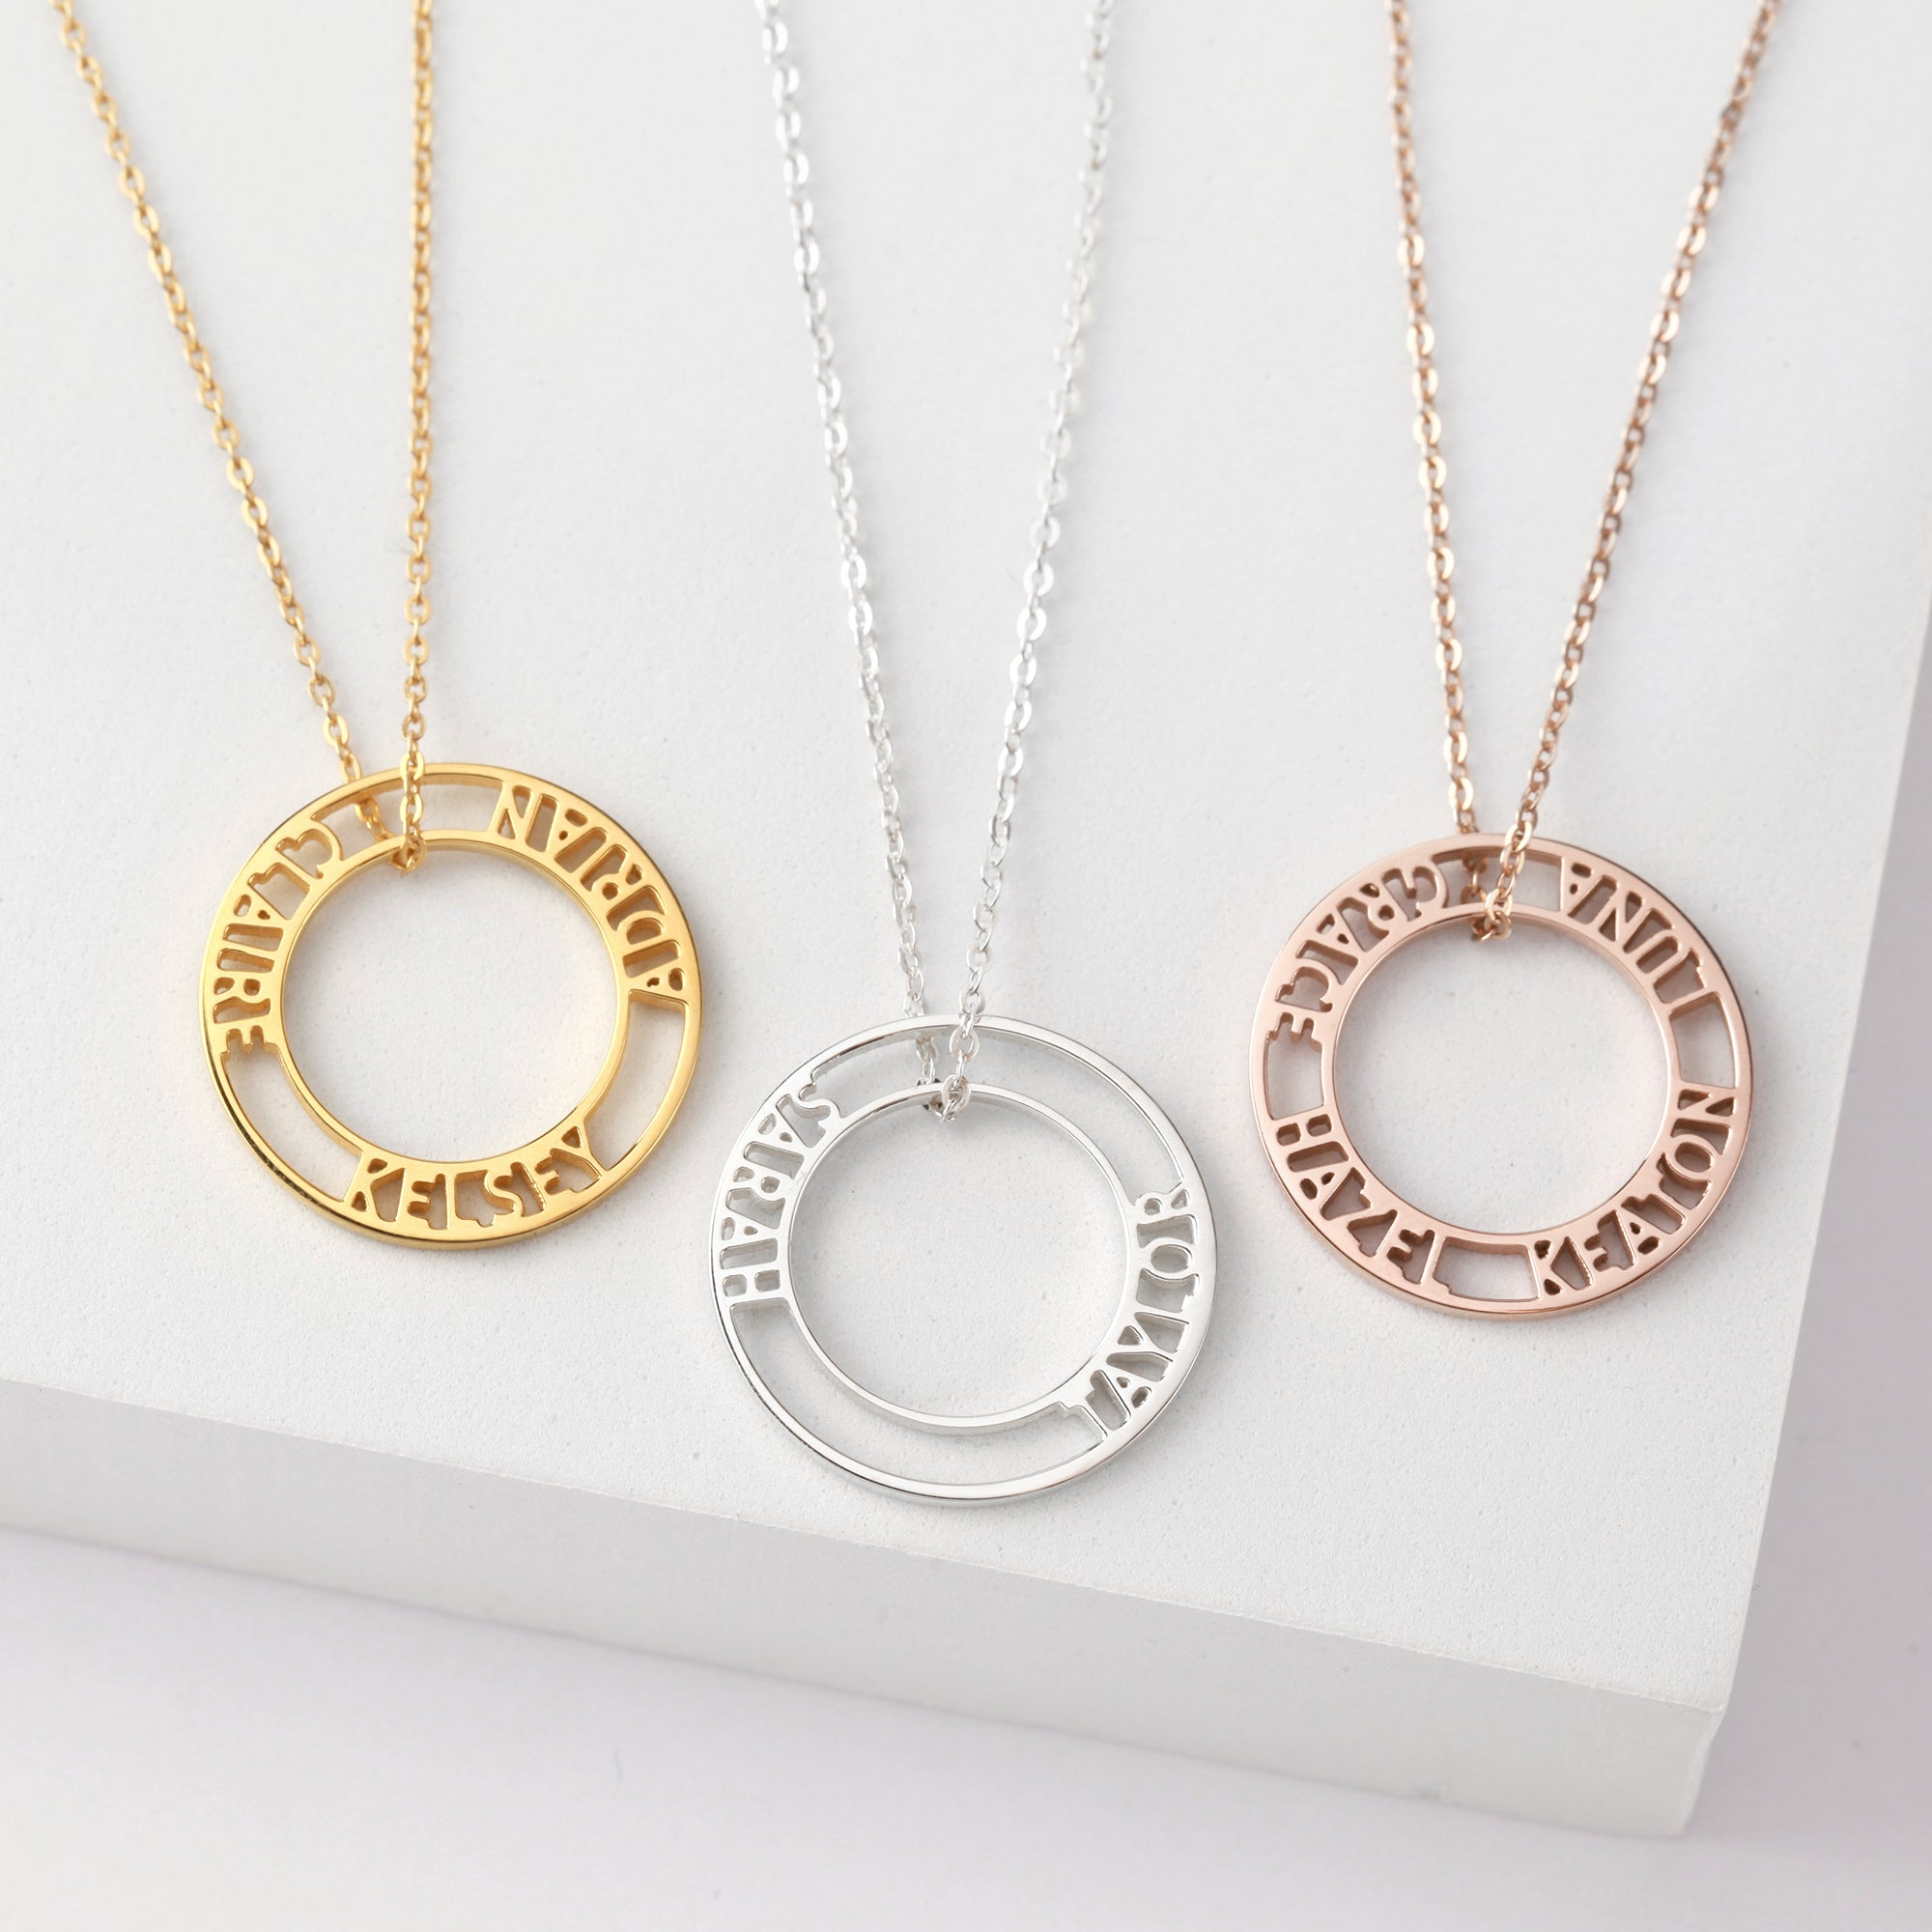 Personalized Name Necklace - Solid Sterling Silver with Gold/Rose Gold Plating - Safe for Sensitive Skin - Perfect Gift for Any Occasion - Necklaces - Bijou Her -  -  - 